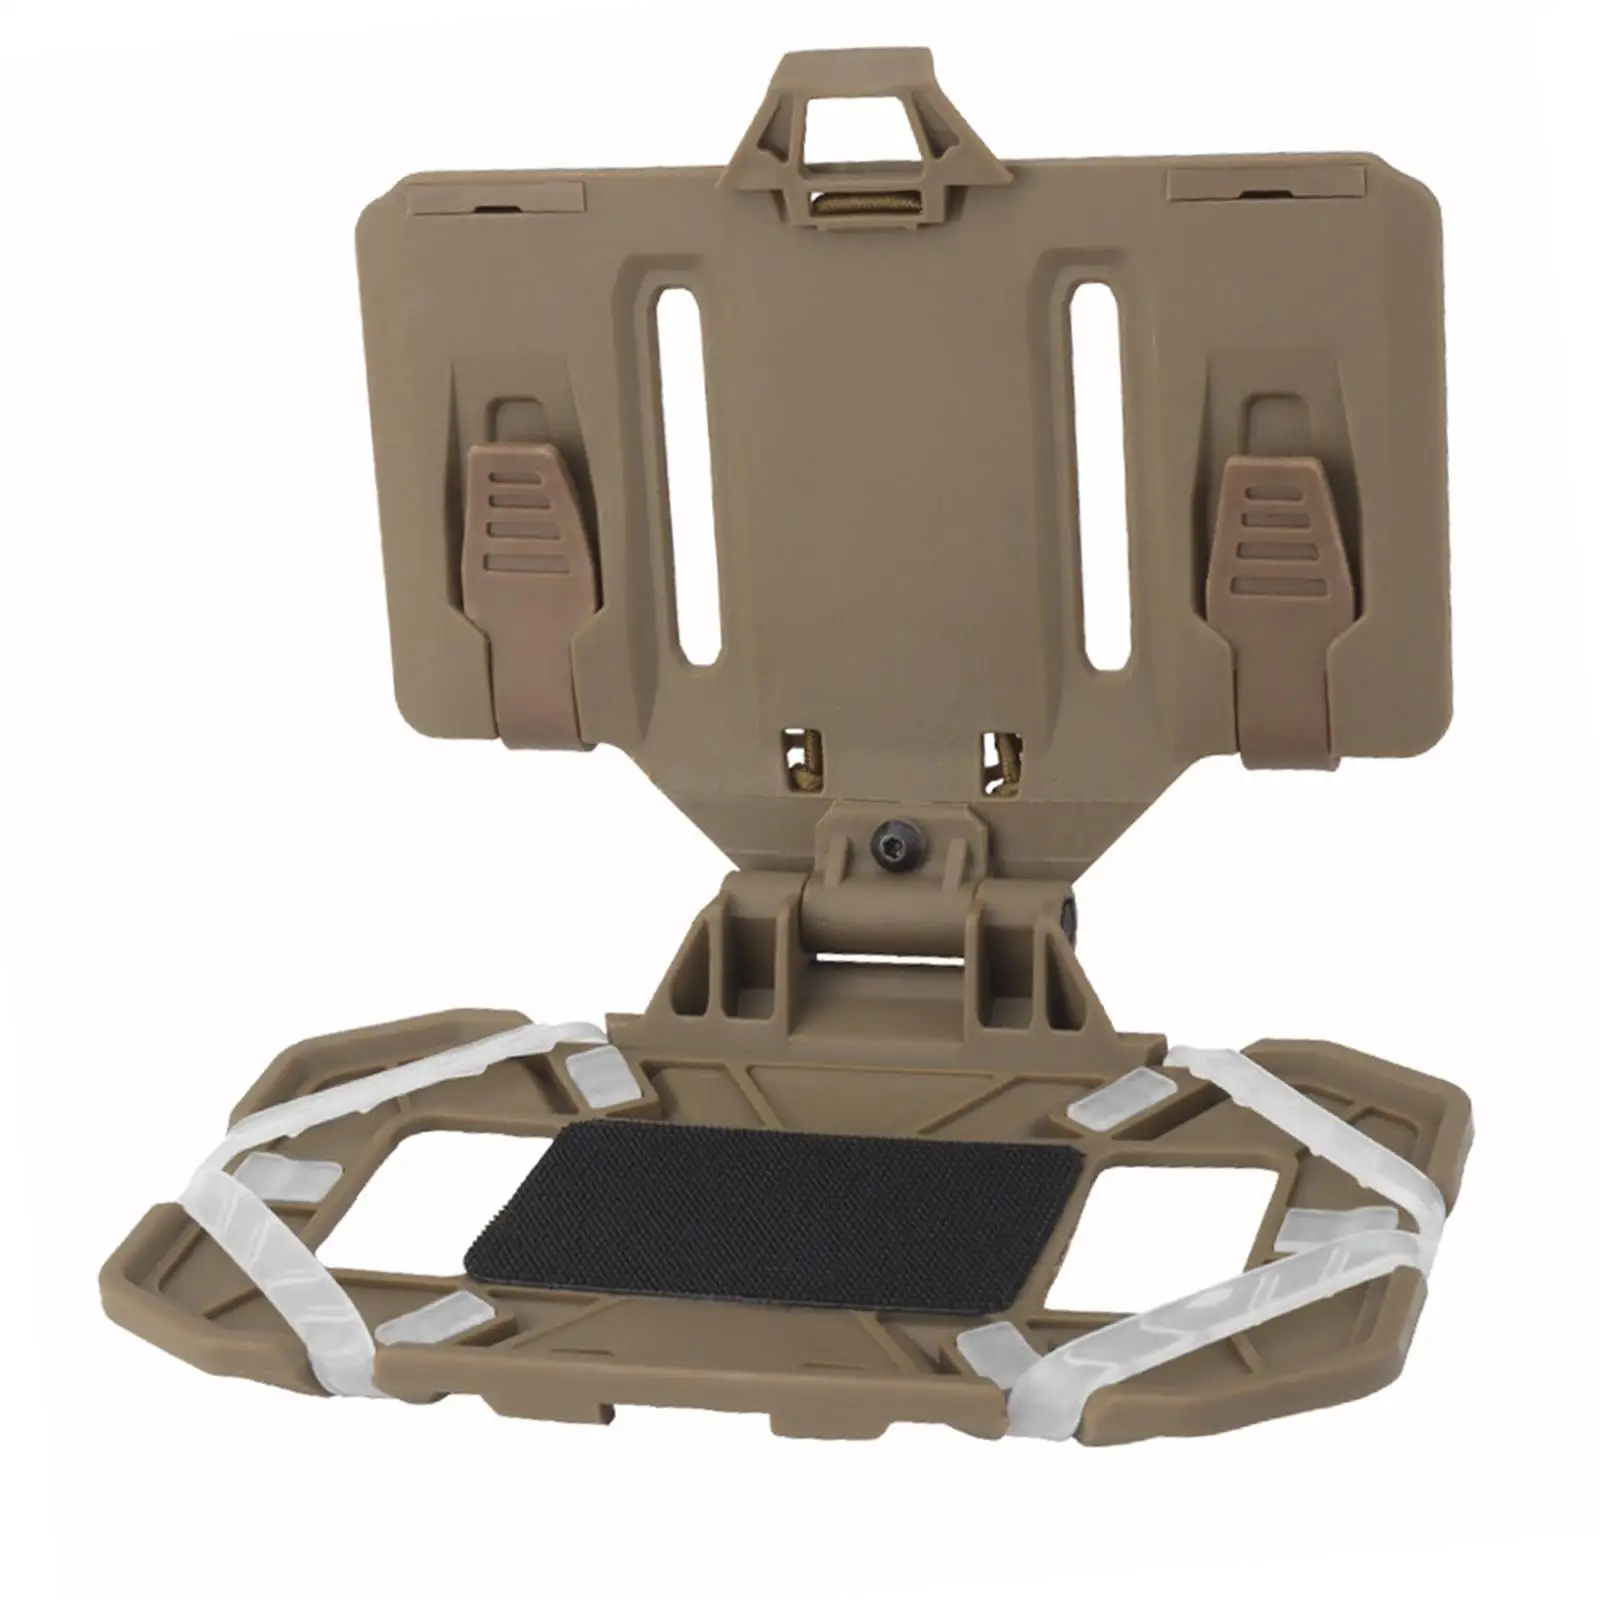 Hunting Vest Phone Board Lightweight Chest Phone Holder Mount Phone Carrier Plate for Most Phones Waist Belts Training